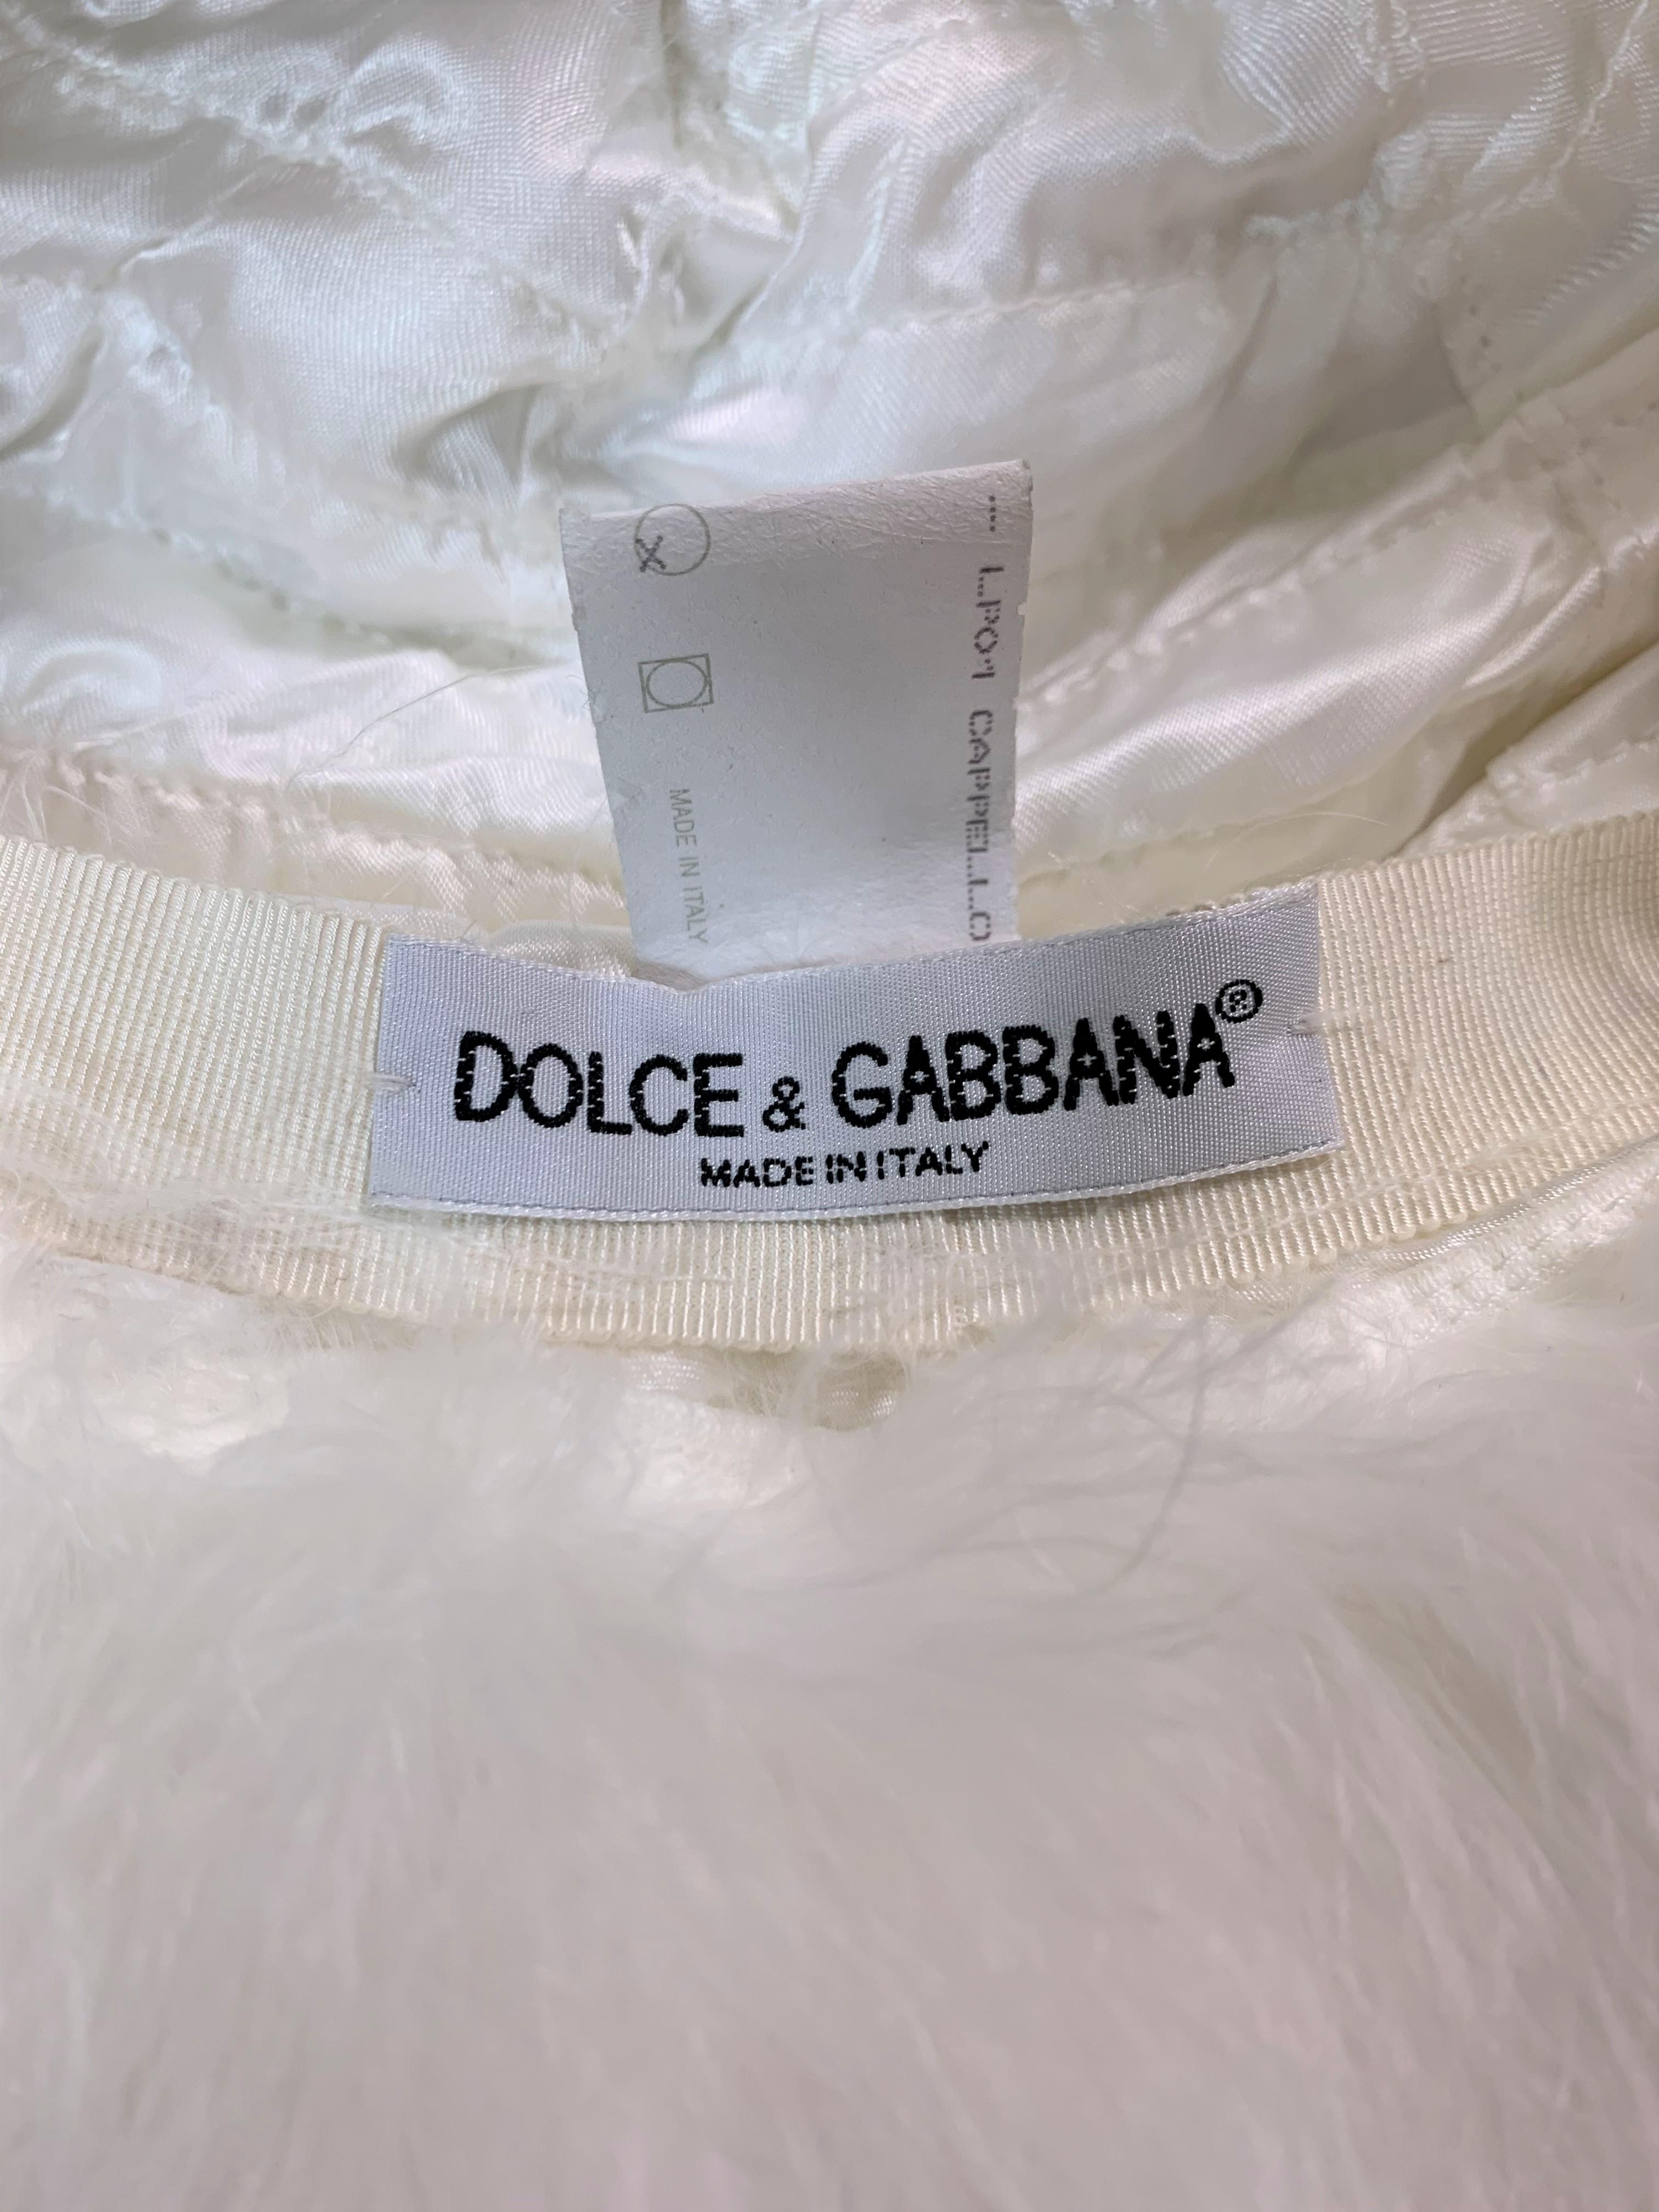 S/S 1995 Dolce & Gabbana Runway White Feather Cropped Jacket & Hat In Good Condition In Yukon, OK